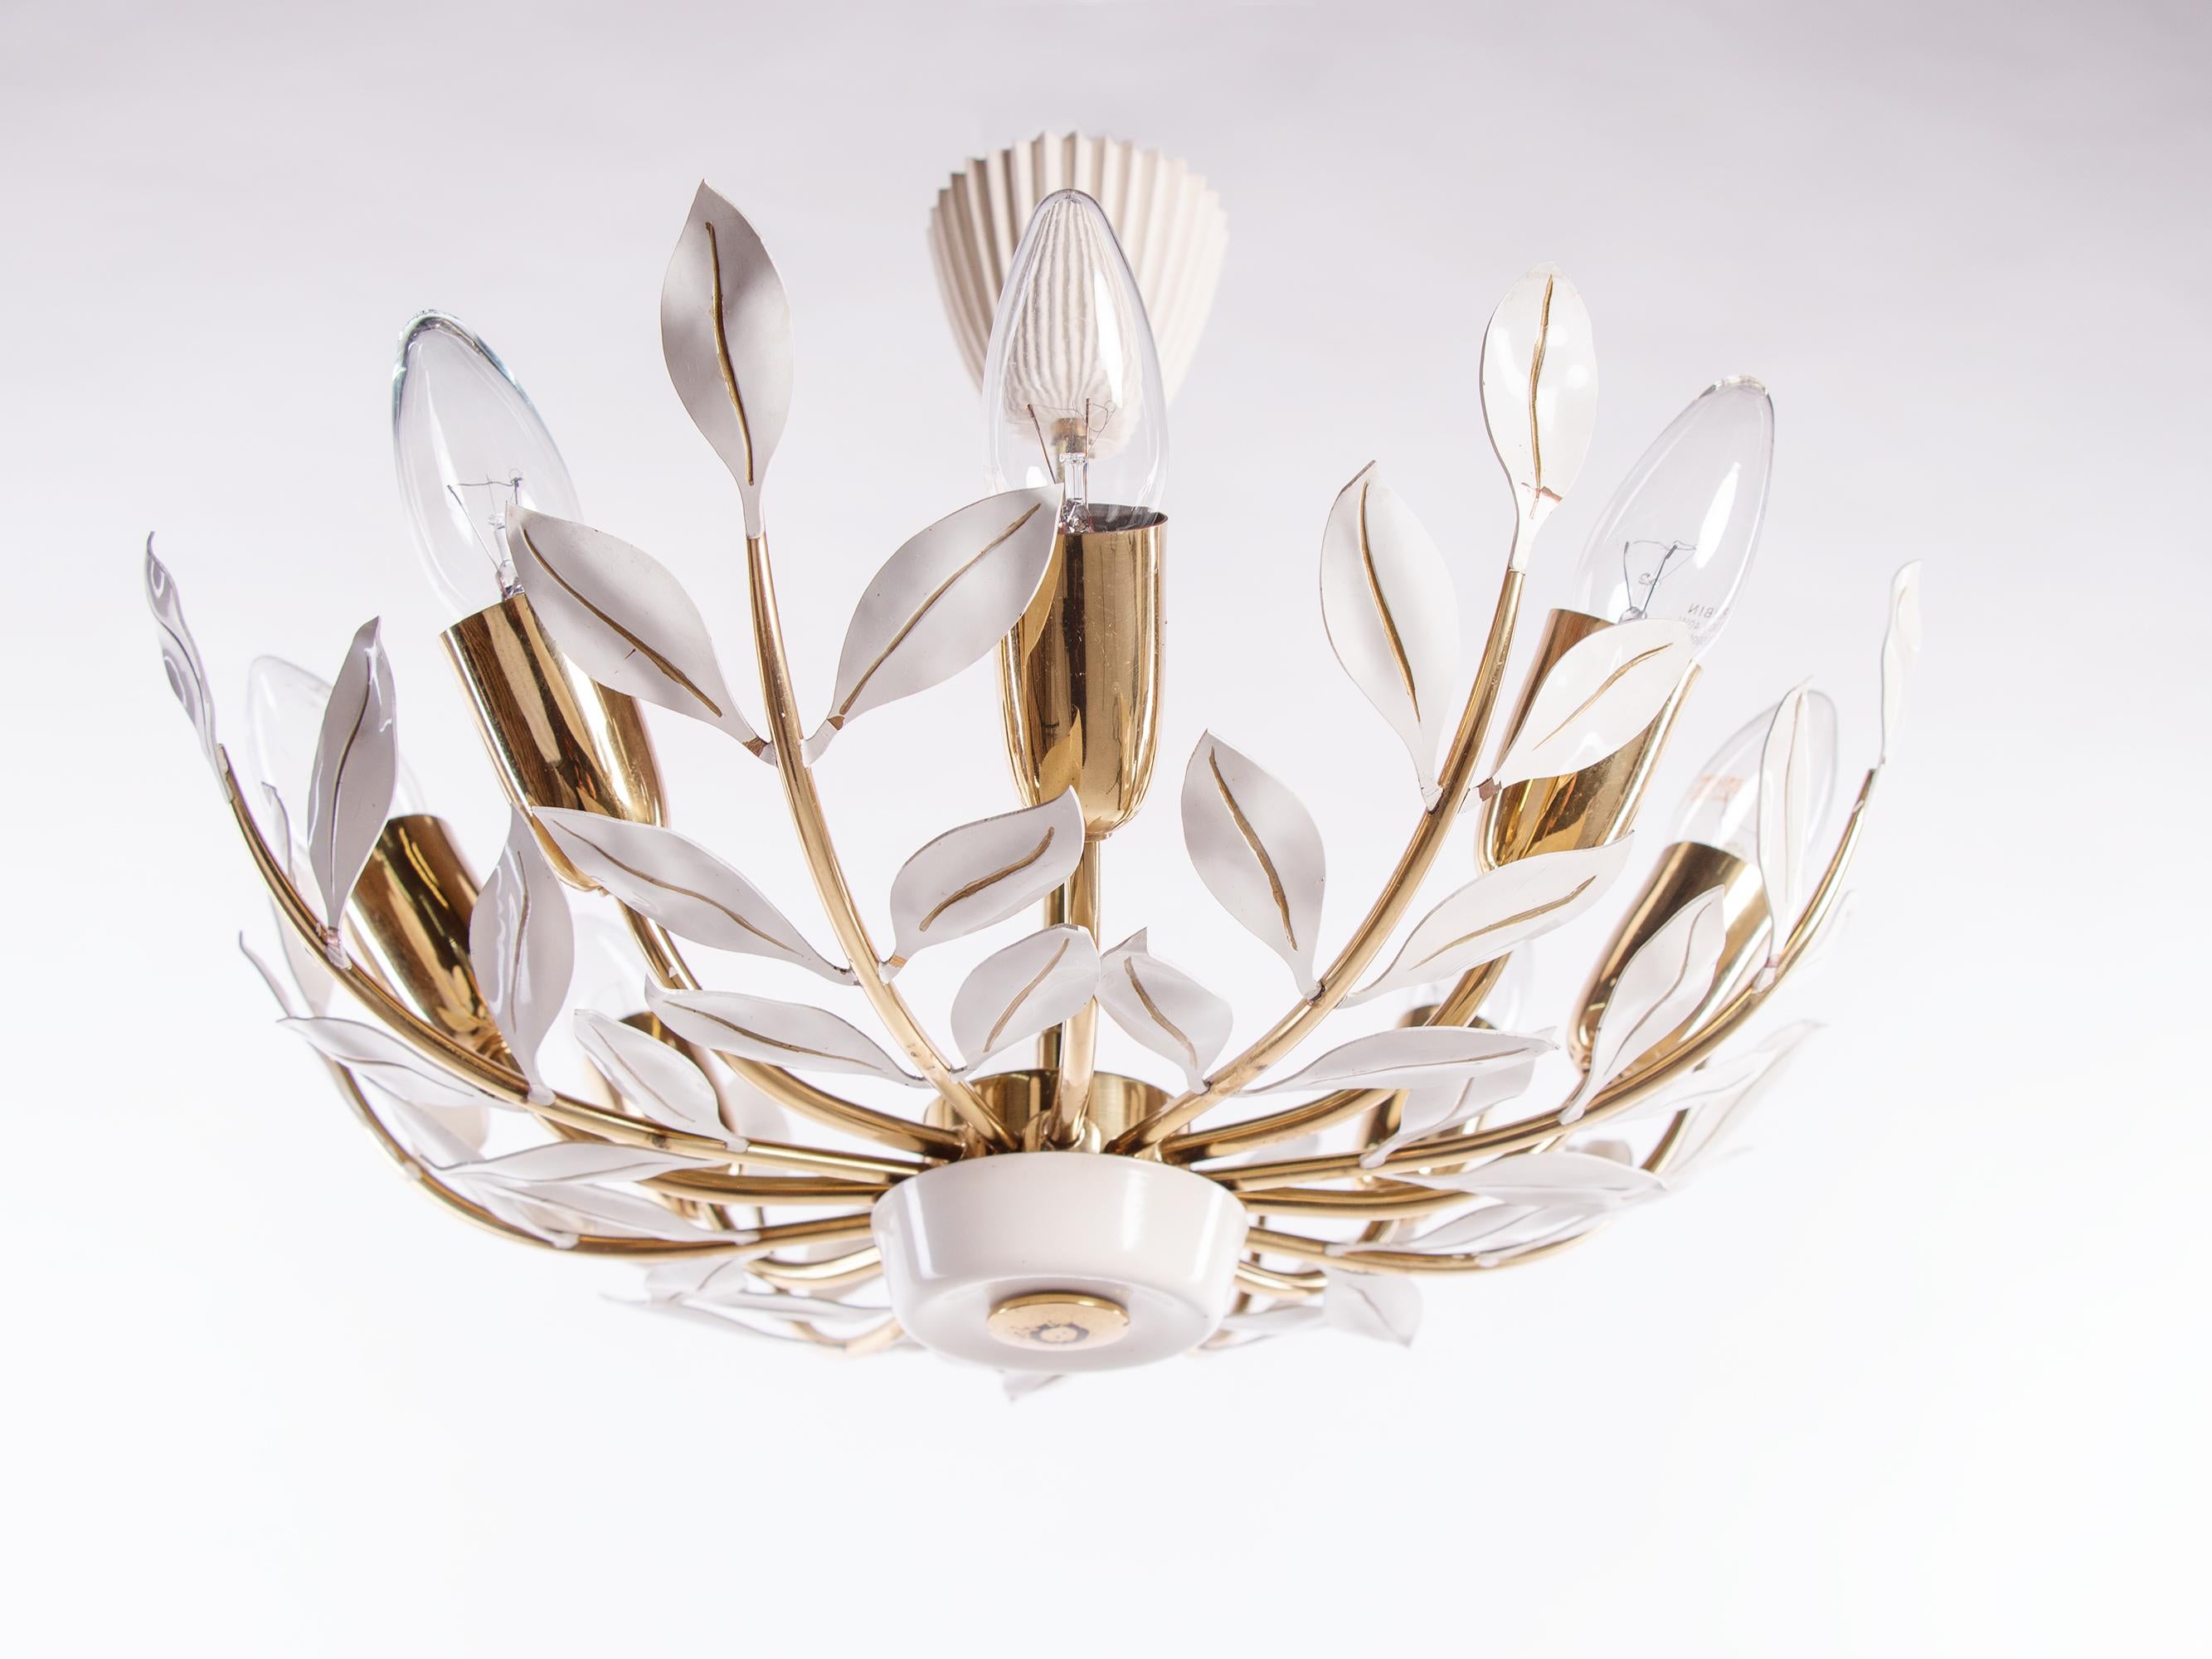 Elegant chandelier with 8 arms executed in brass and metal with white painted metal leaves. 
 
Manufactured by Vereinigte Werkstätten Munich in Germany in the 1950s. 
 
Measures: diameter 17.7